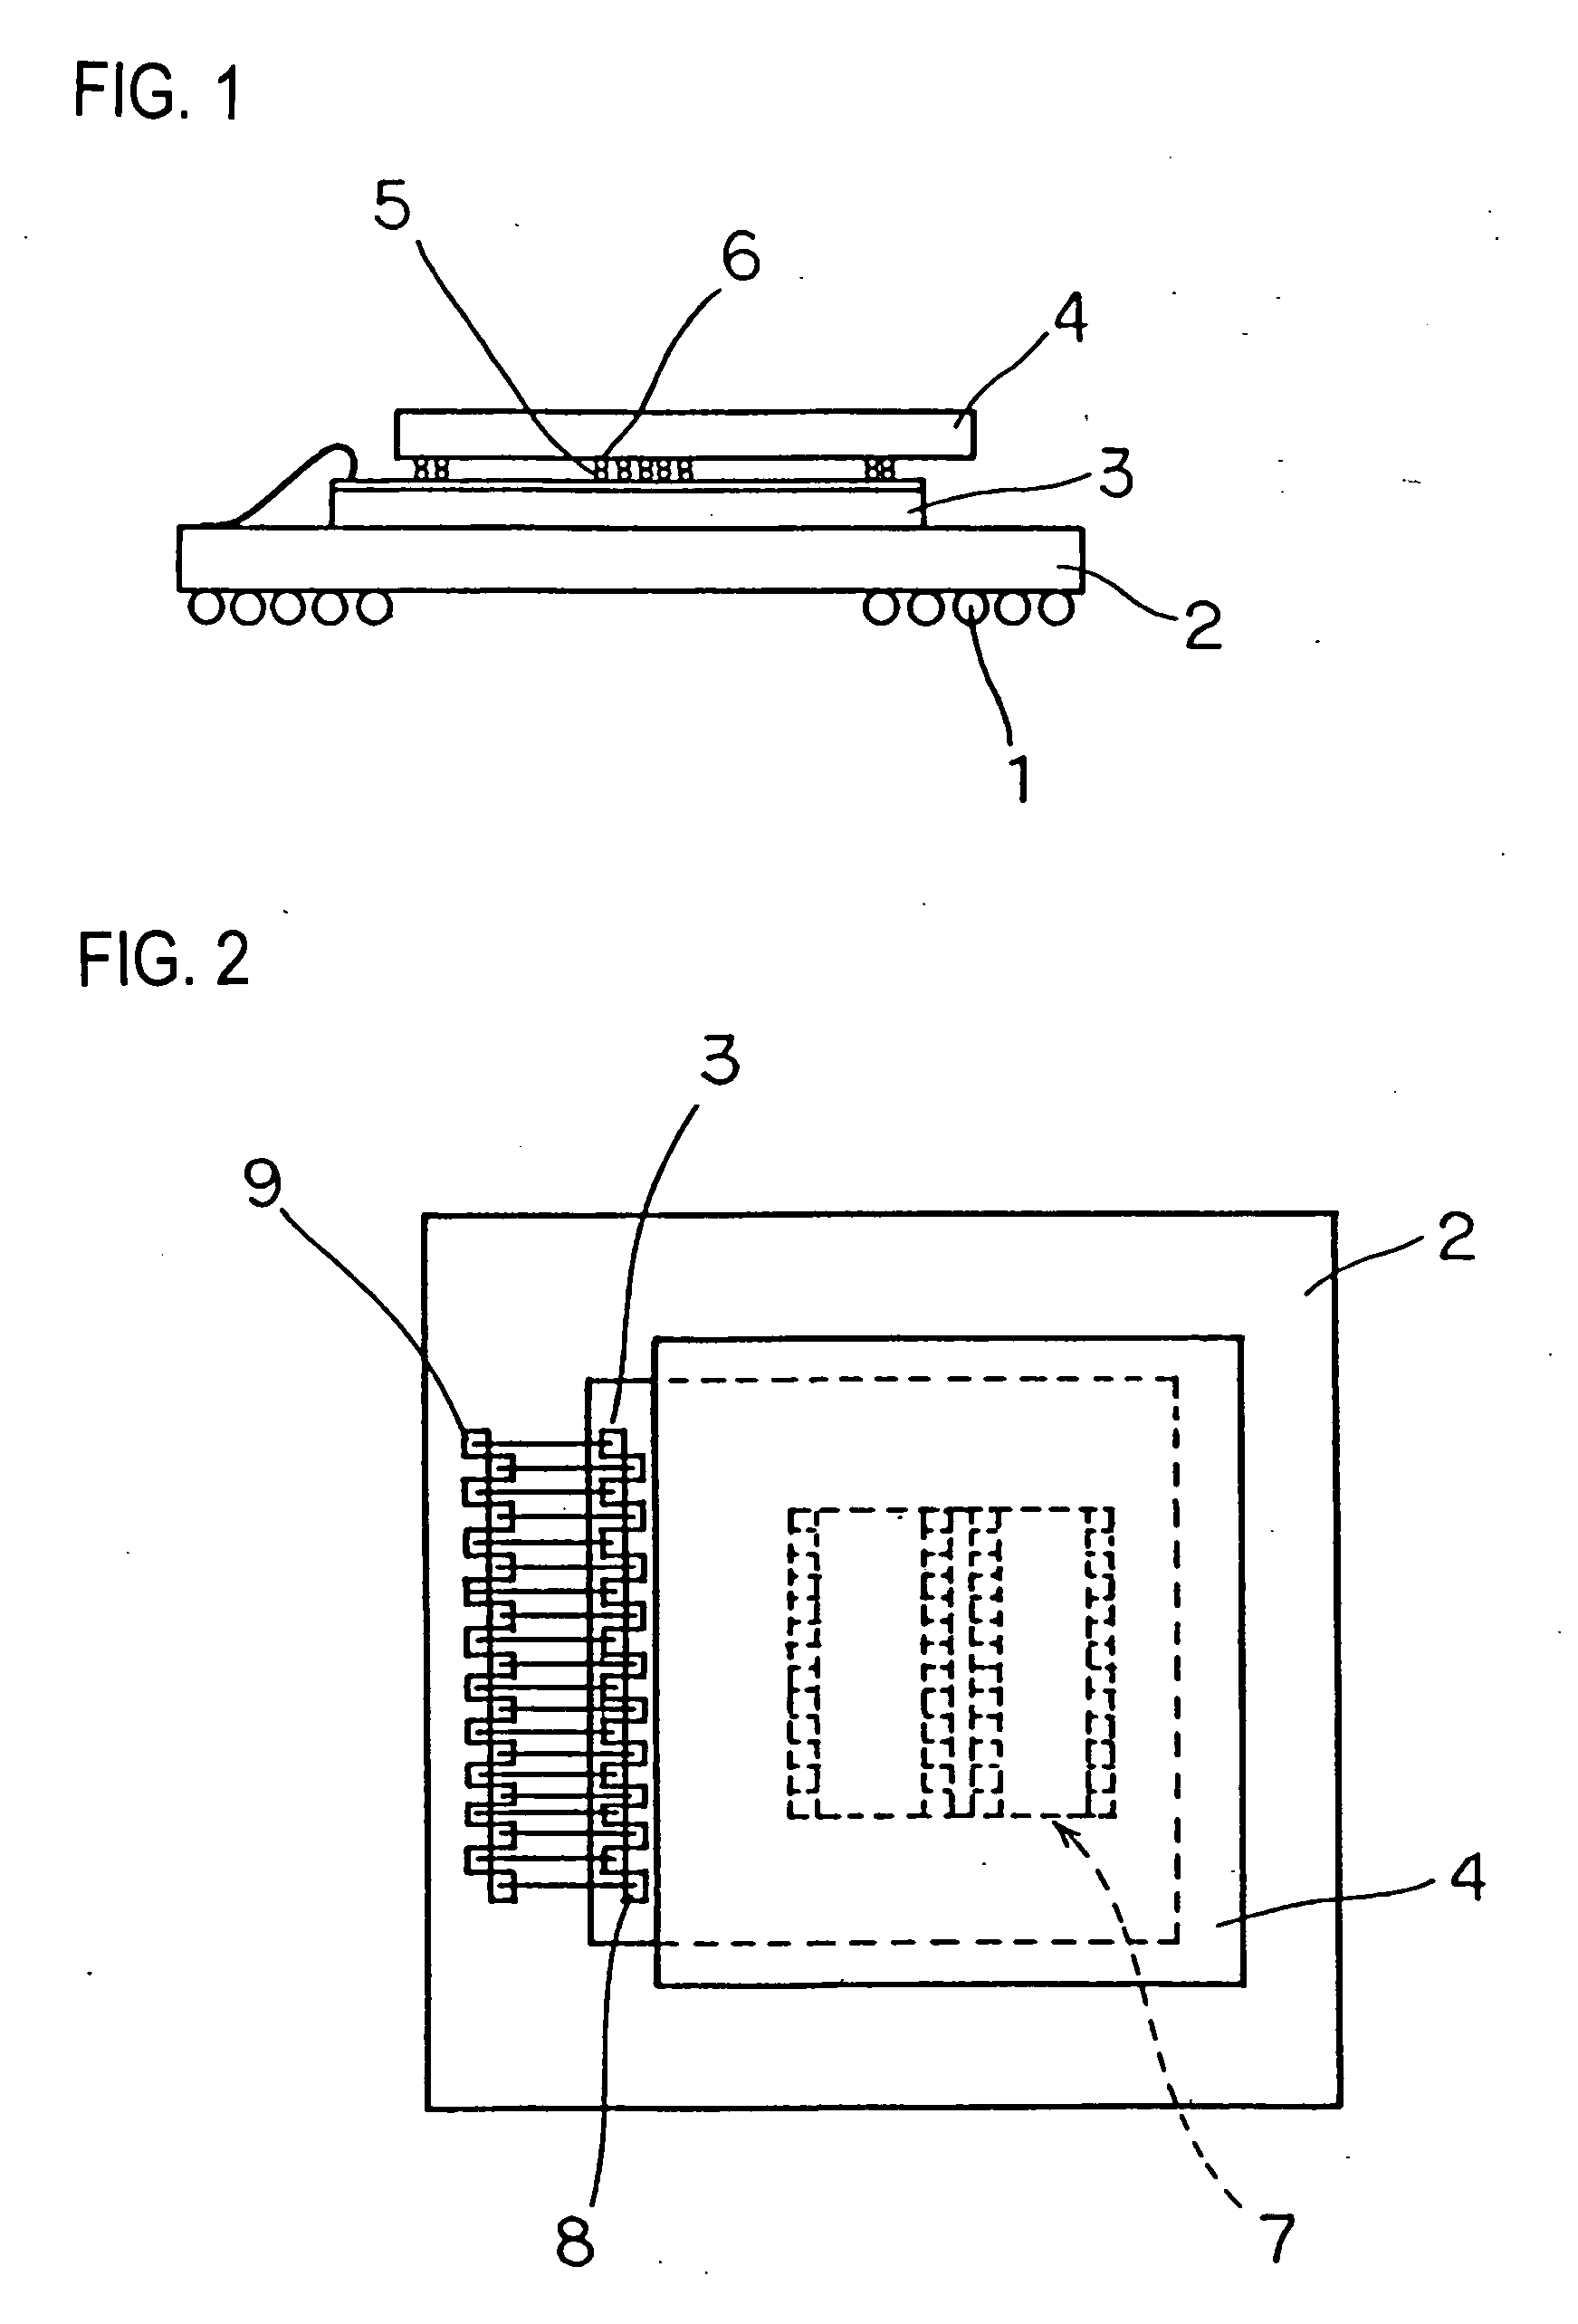 Offset-bonded, multi-chip semiconductor device